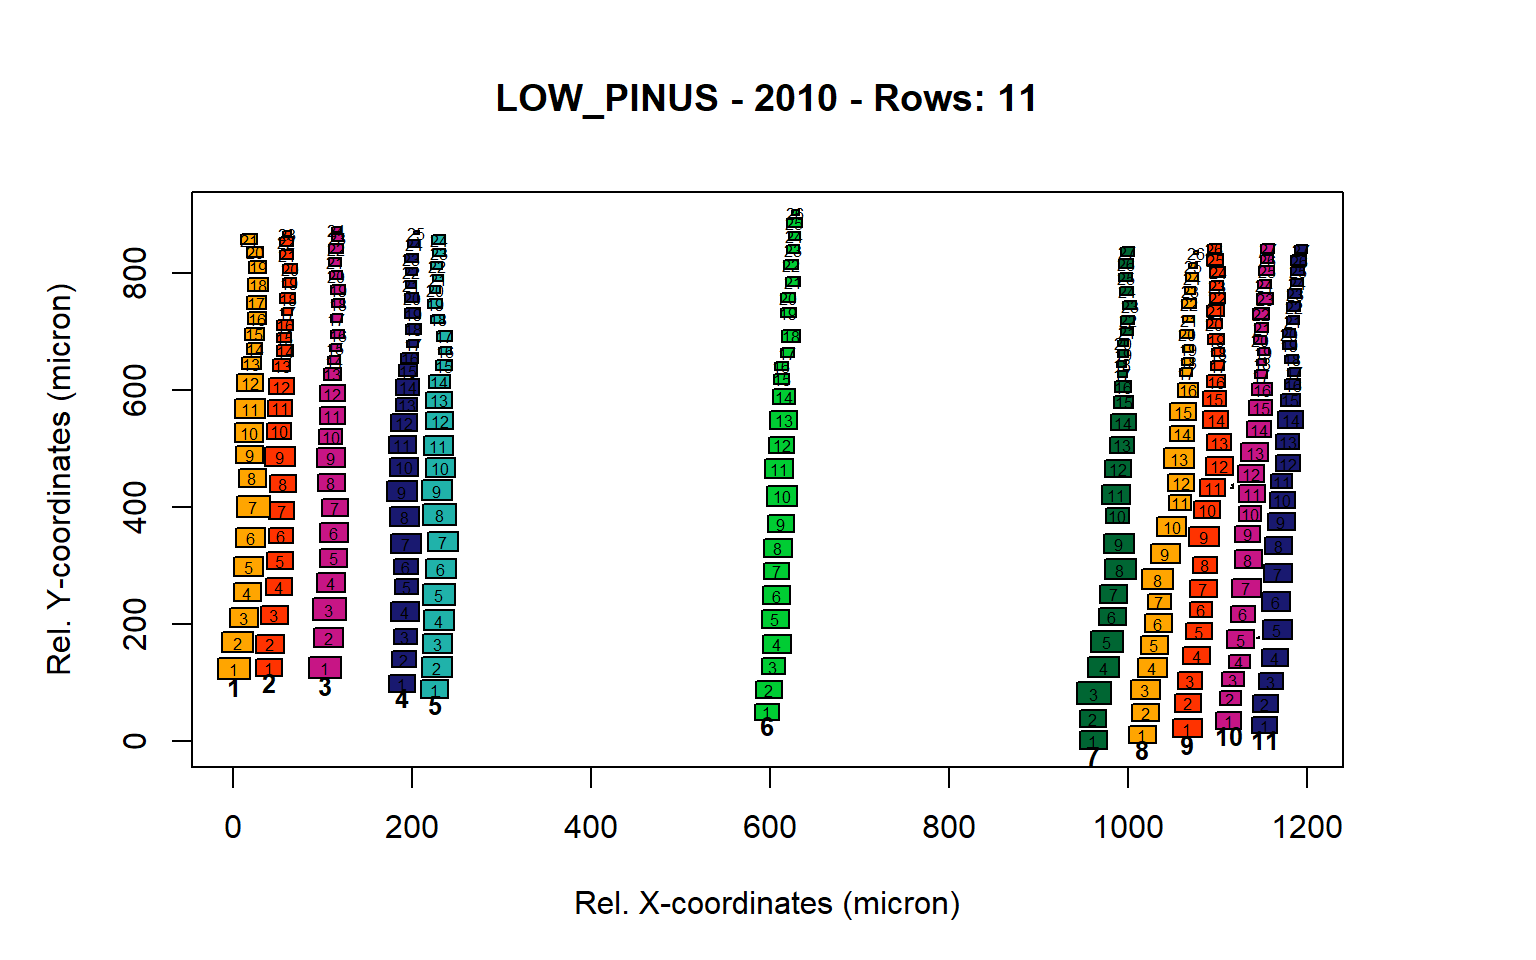 Standard plots generated by the write.output() function for lowland Pinus sylverstris (species="LOW_PINUS"), including 2007, 2008, 2009 and 2010.